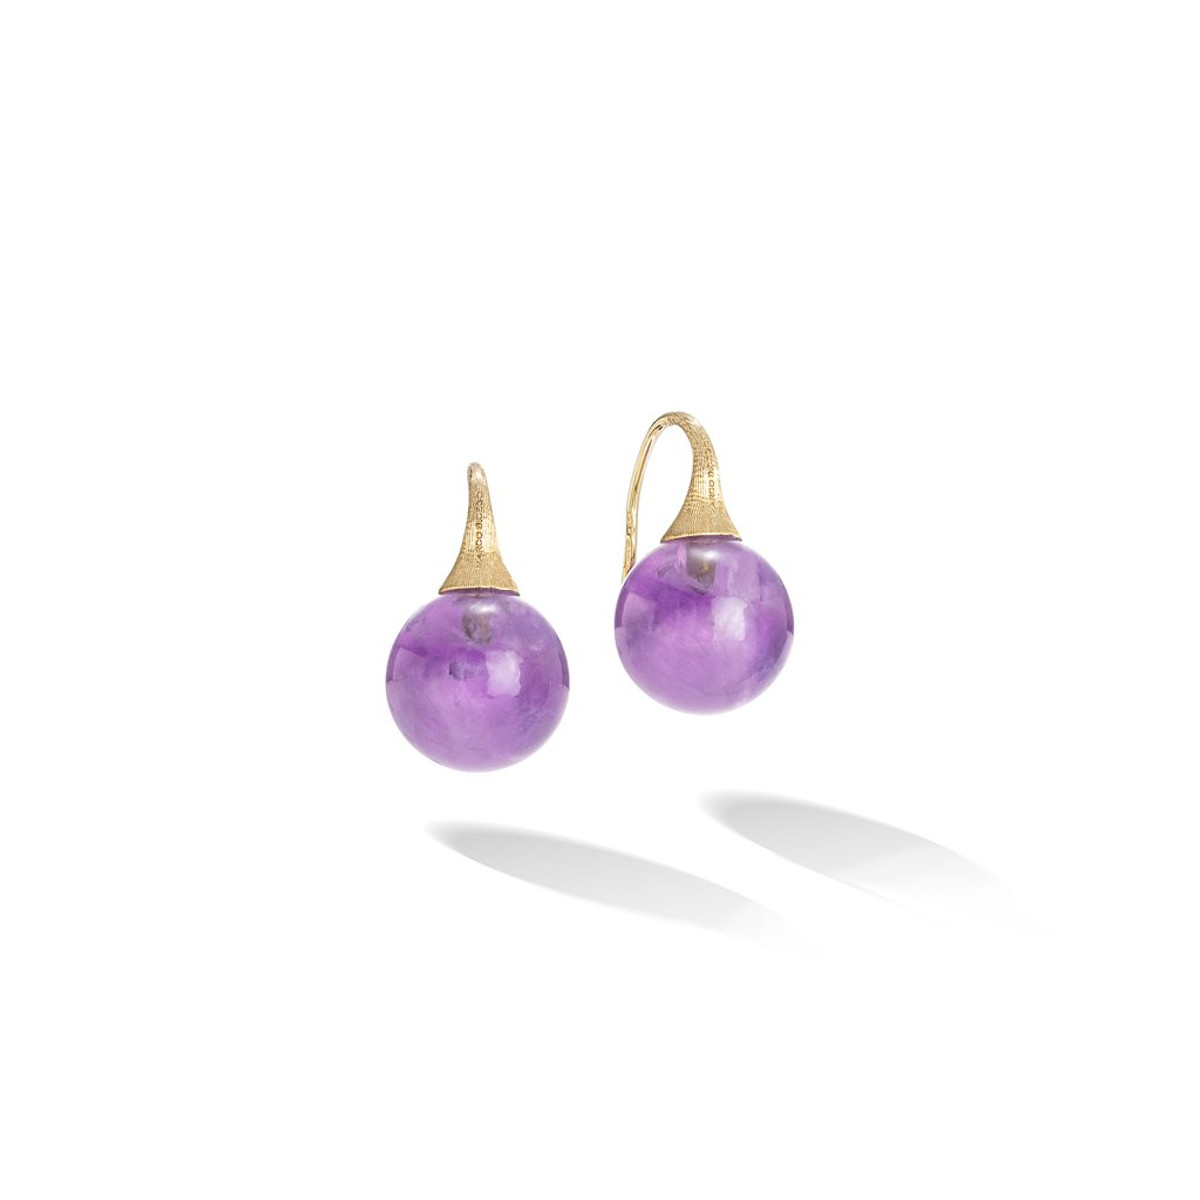 Marco Bicego 18K Yellow Gold Amethyst Boules Earrings-30058 Product Image